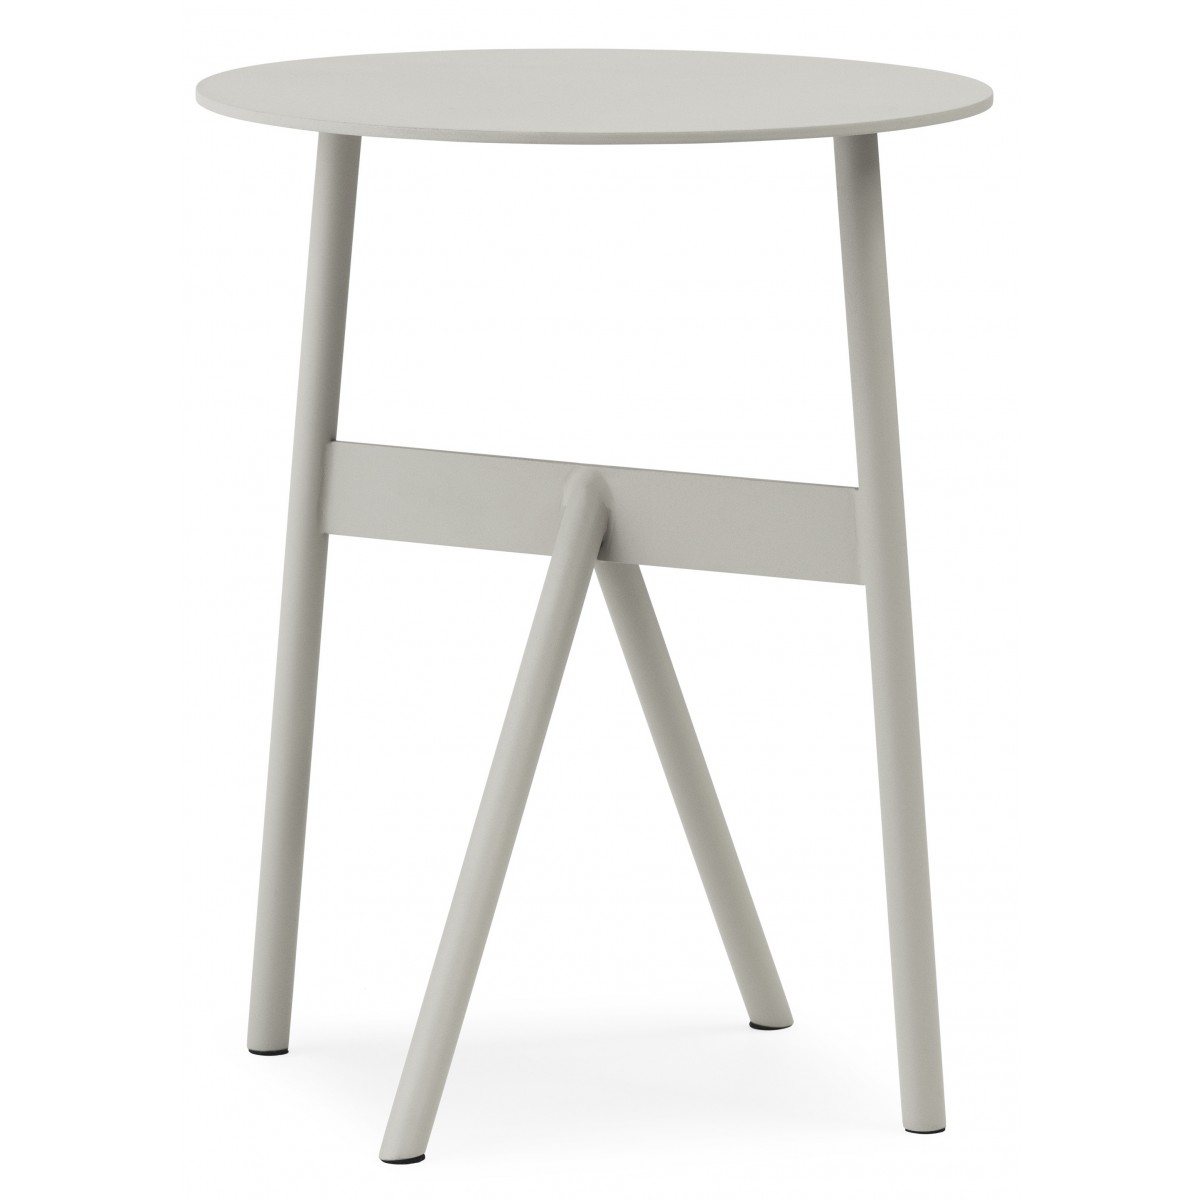 Table basse Stock – gris chaud